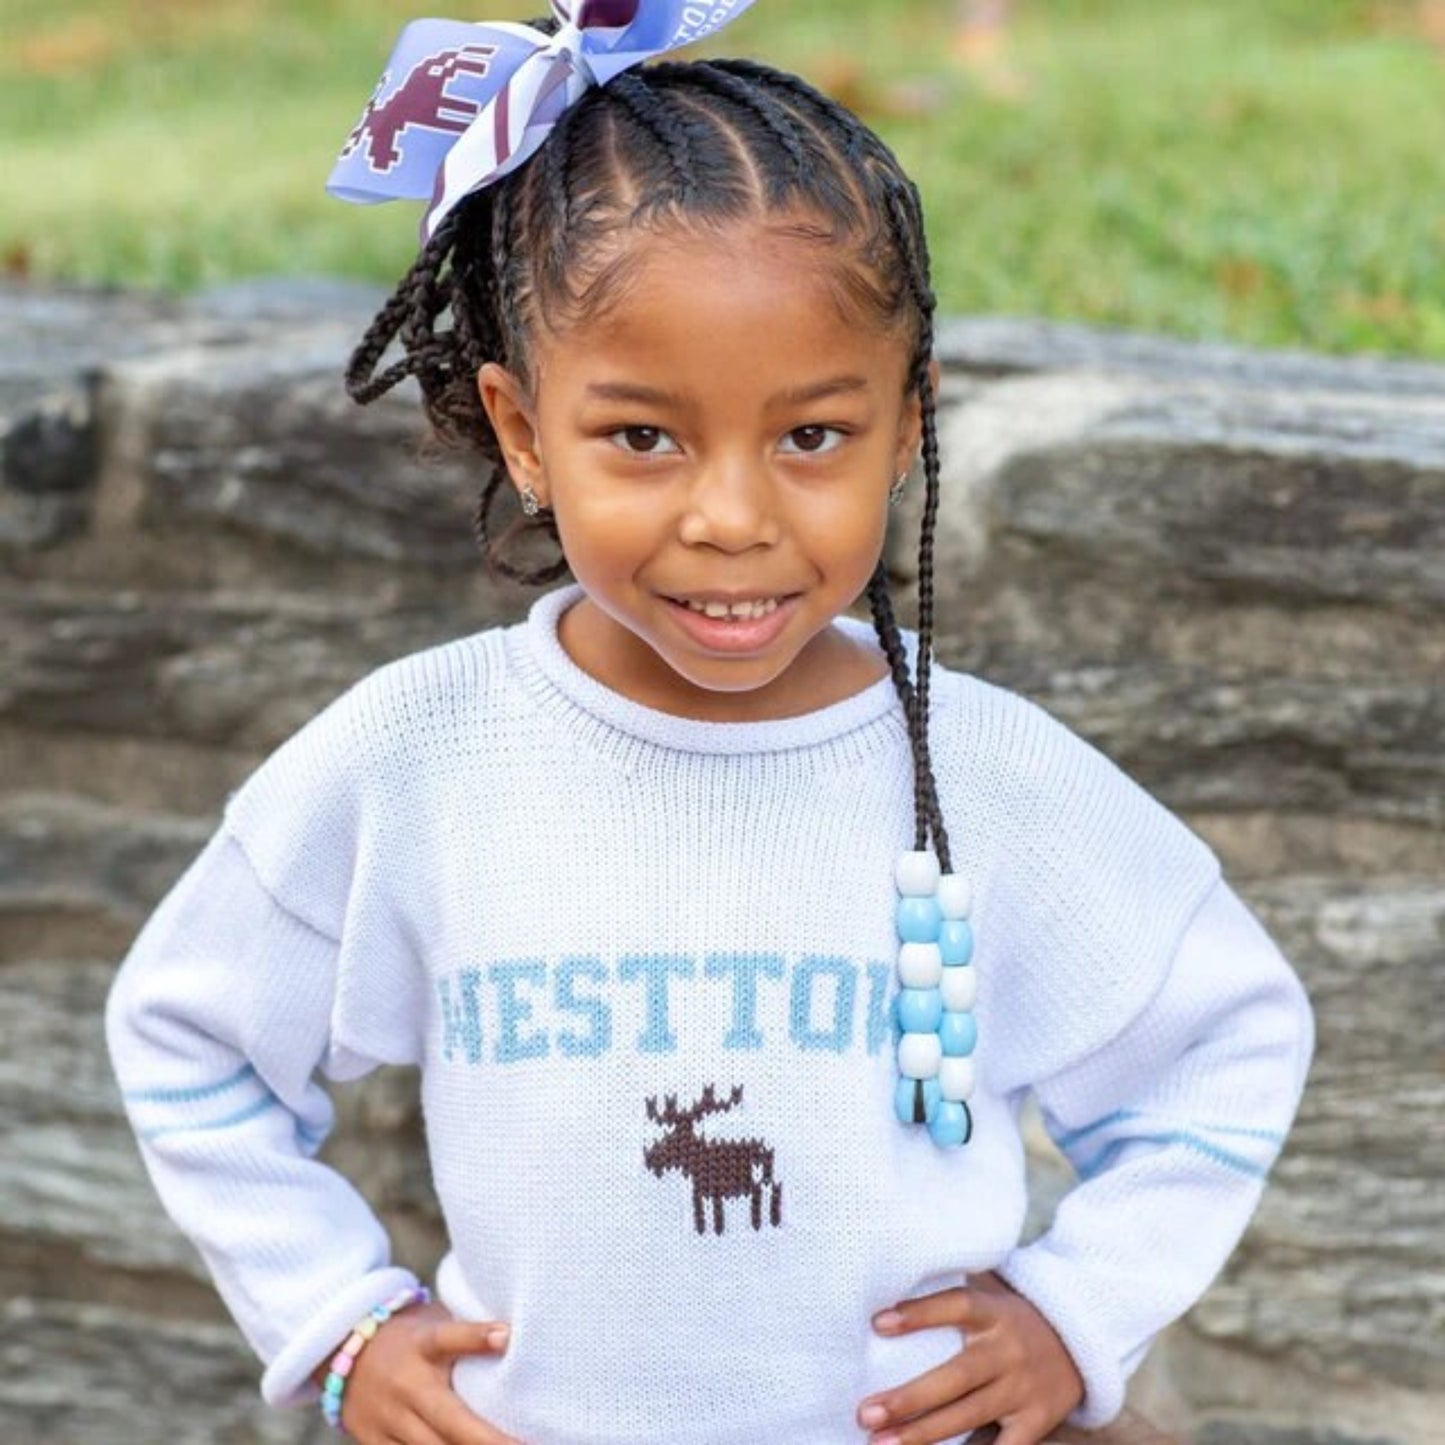 westtown school sweater with moose